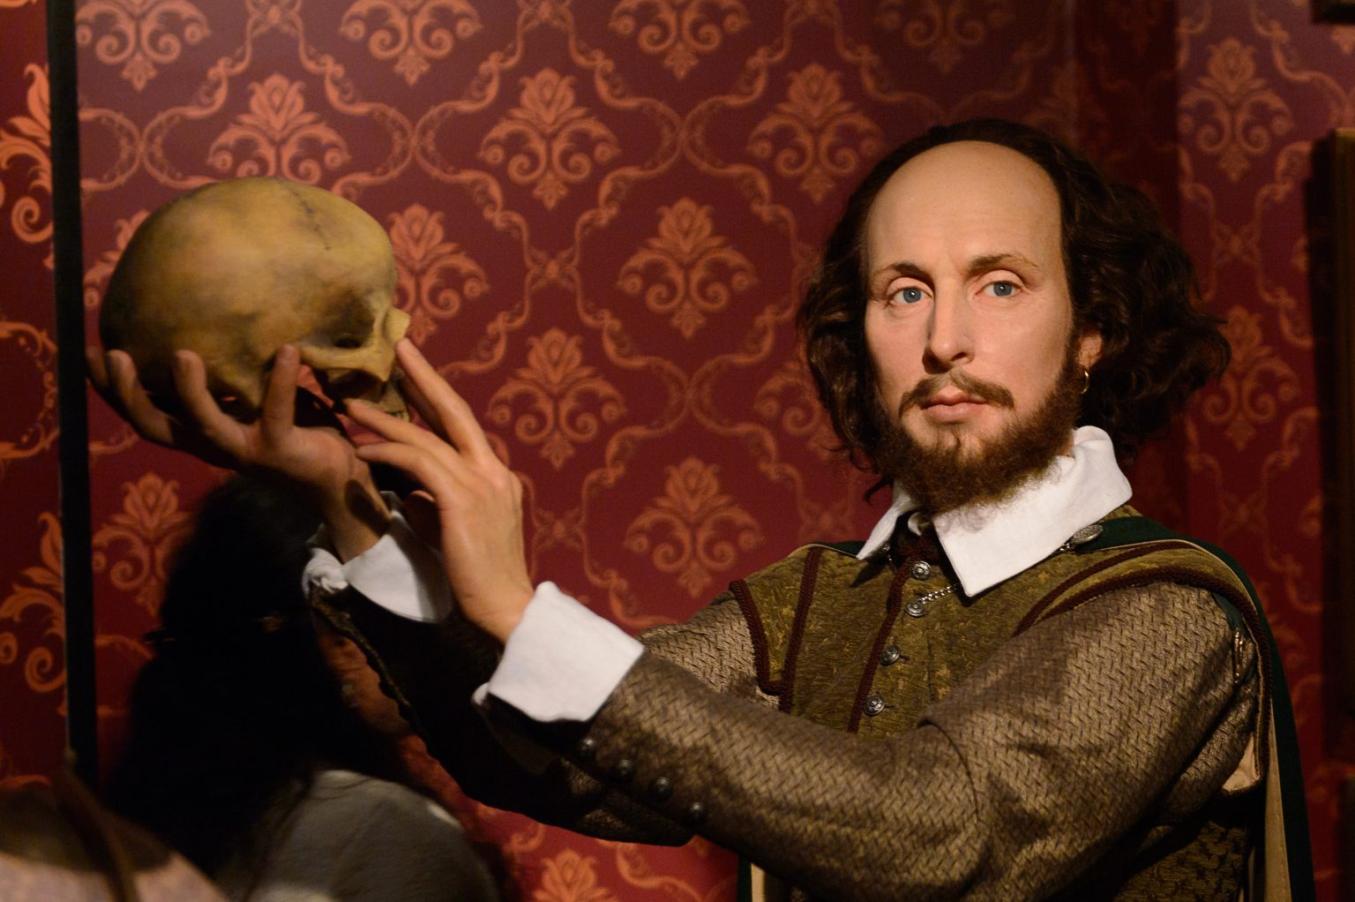 What Are The Most Important Themes And Ideas Explored In Shakespeare's Plays?